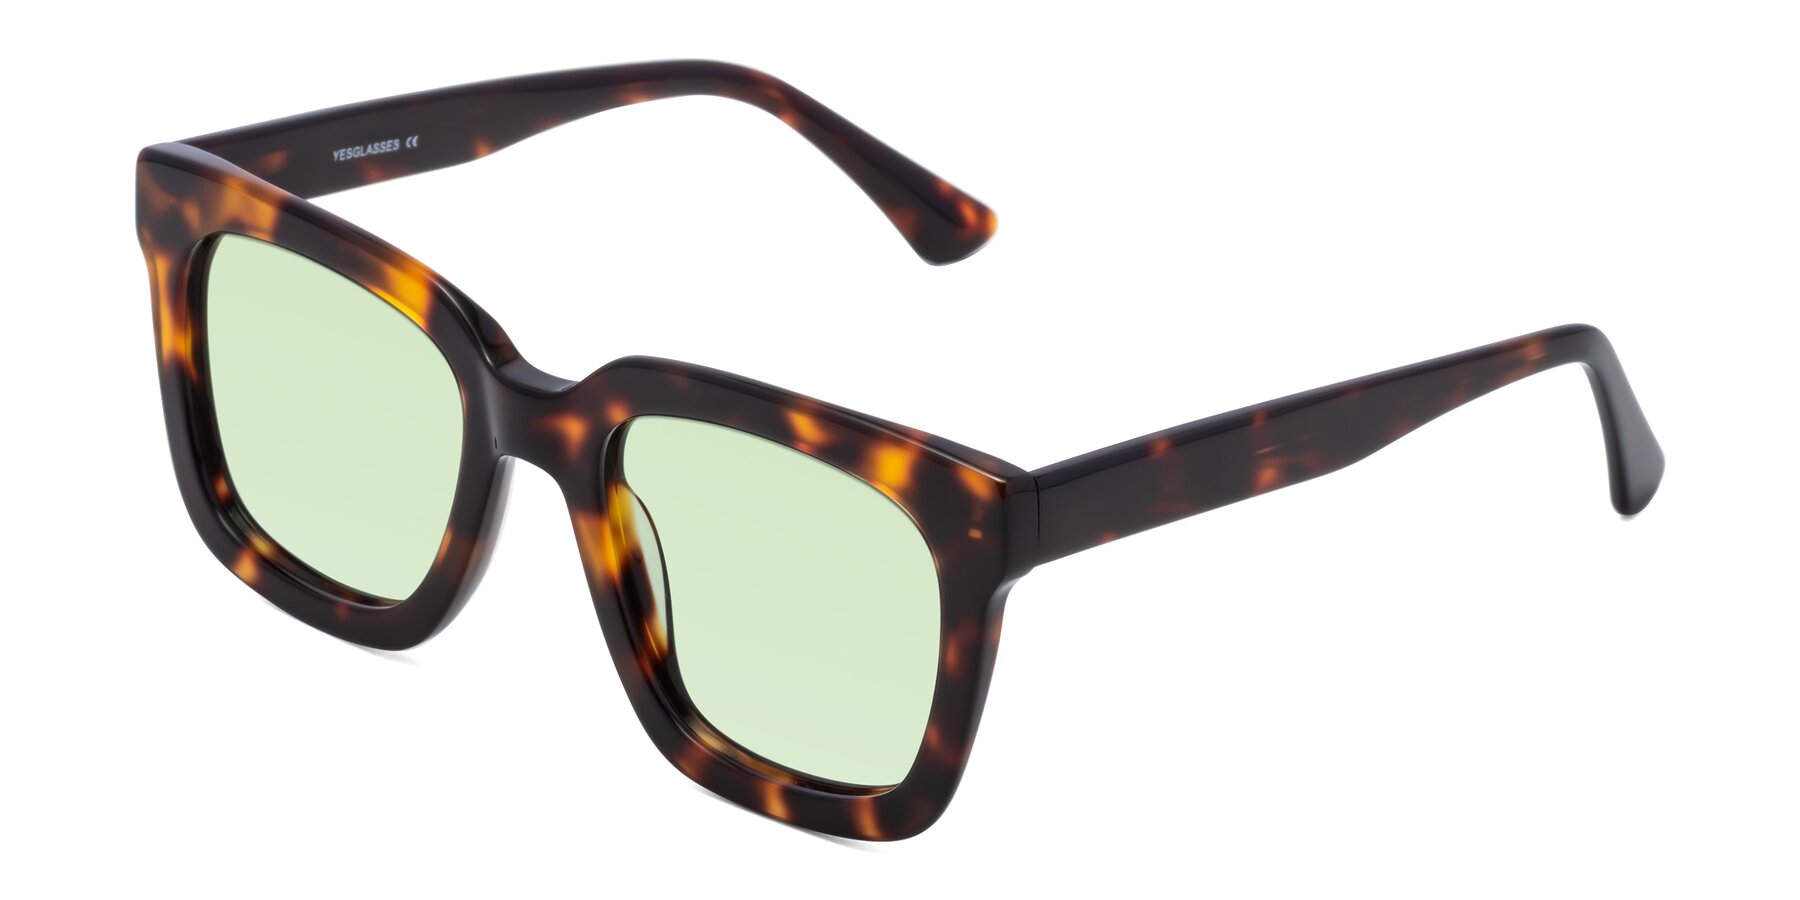 Angle of Parr in Tortoise with Light Green Tinted Lenses